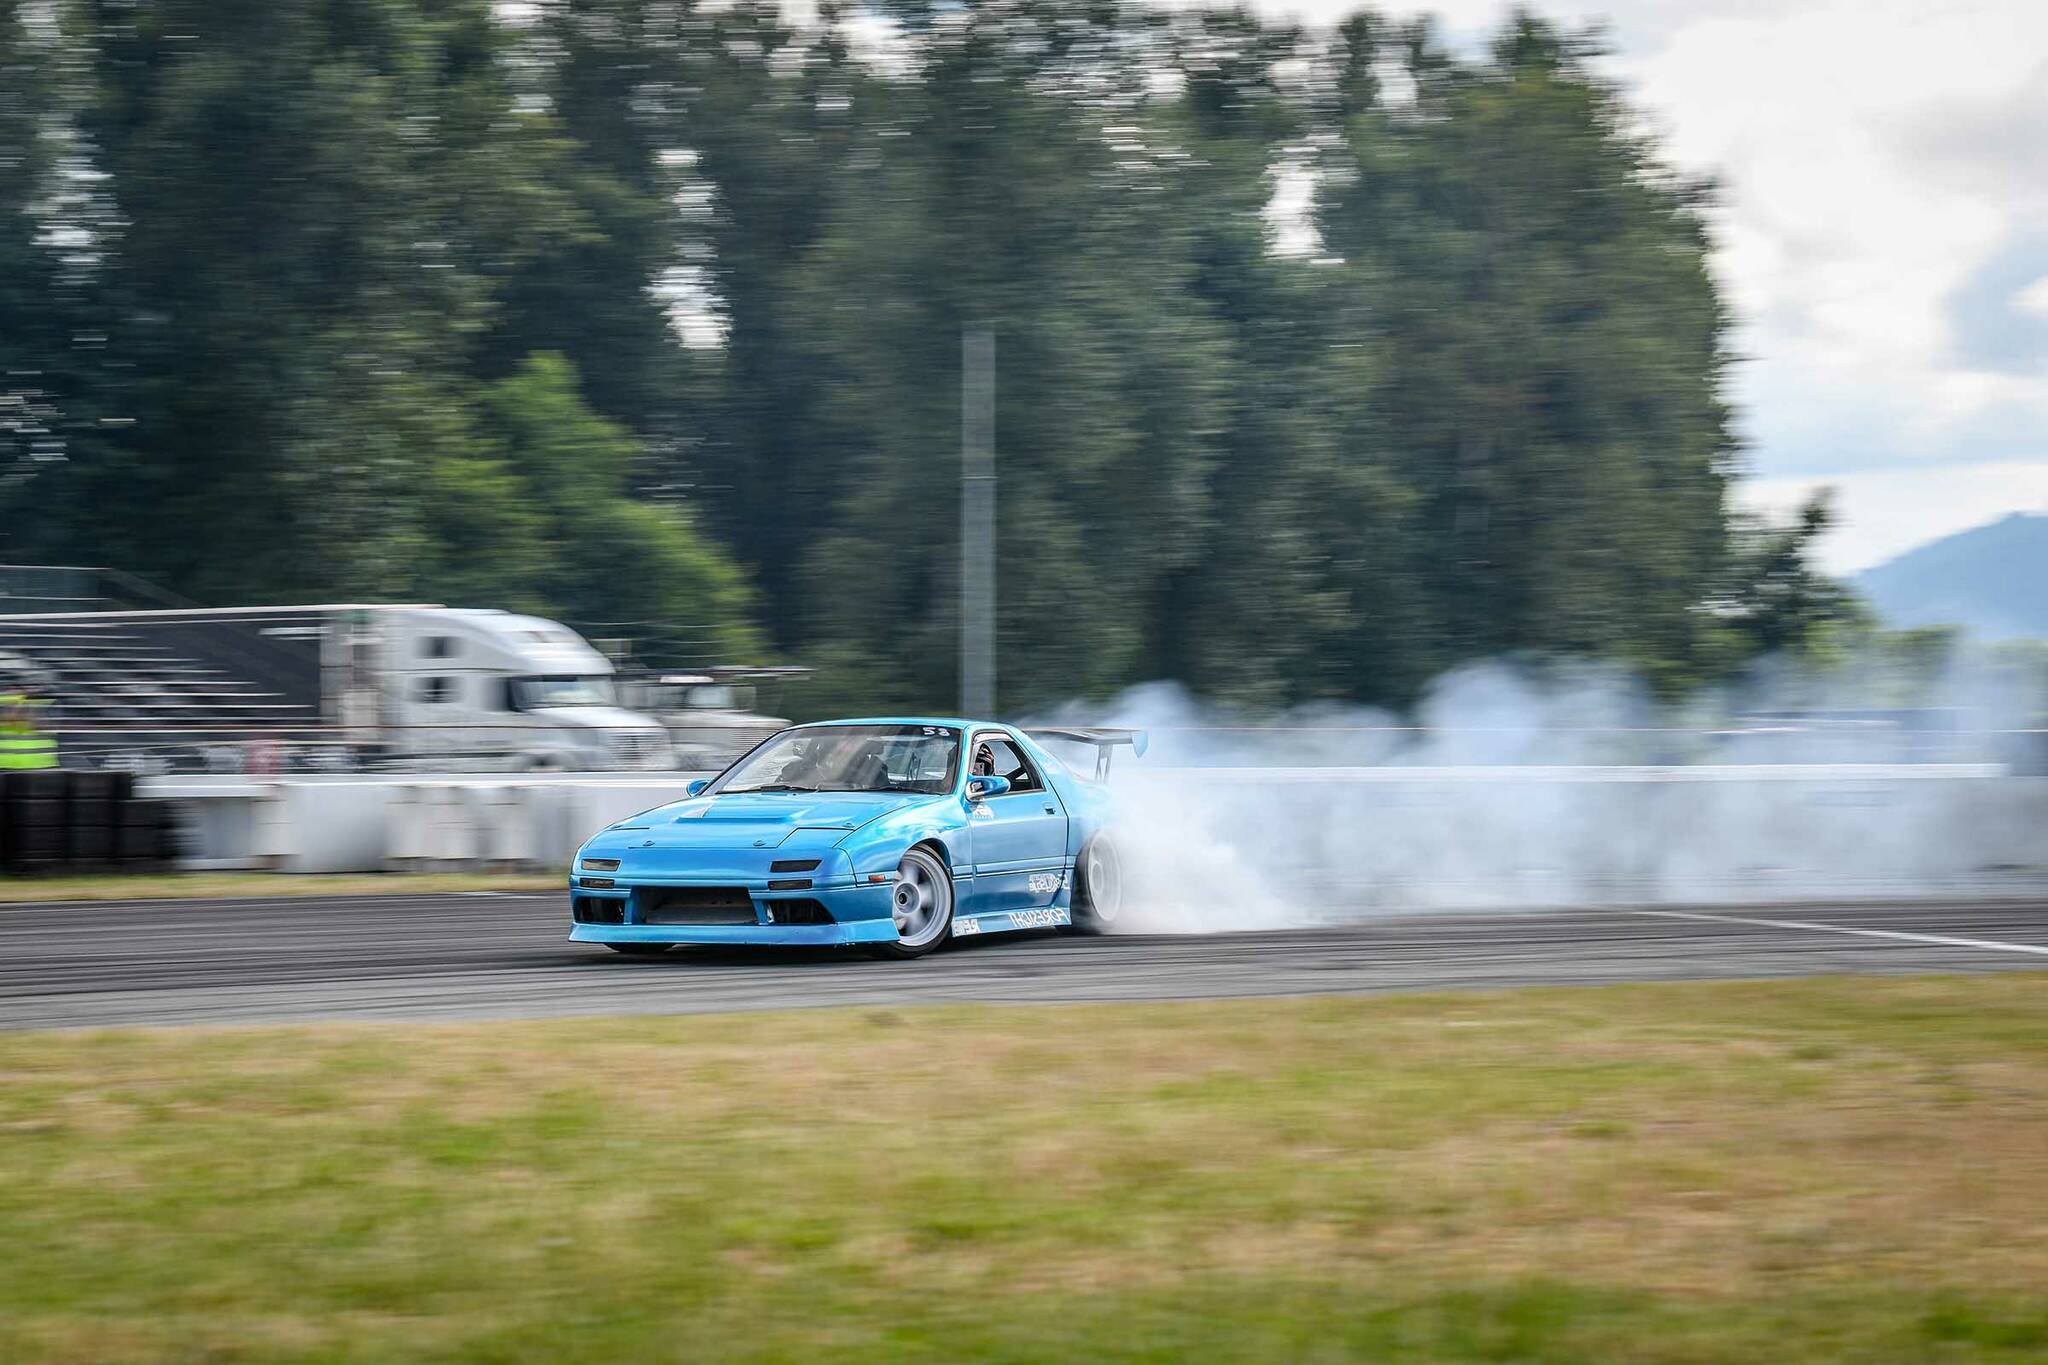 Drifting was introduced to the track several years ago, and now a number of associations run programs out of Mission. / Blair Howard Photography